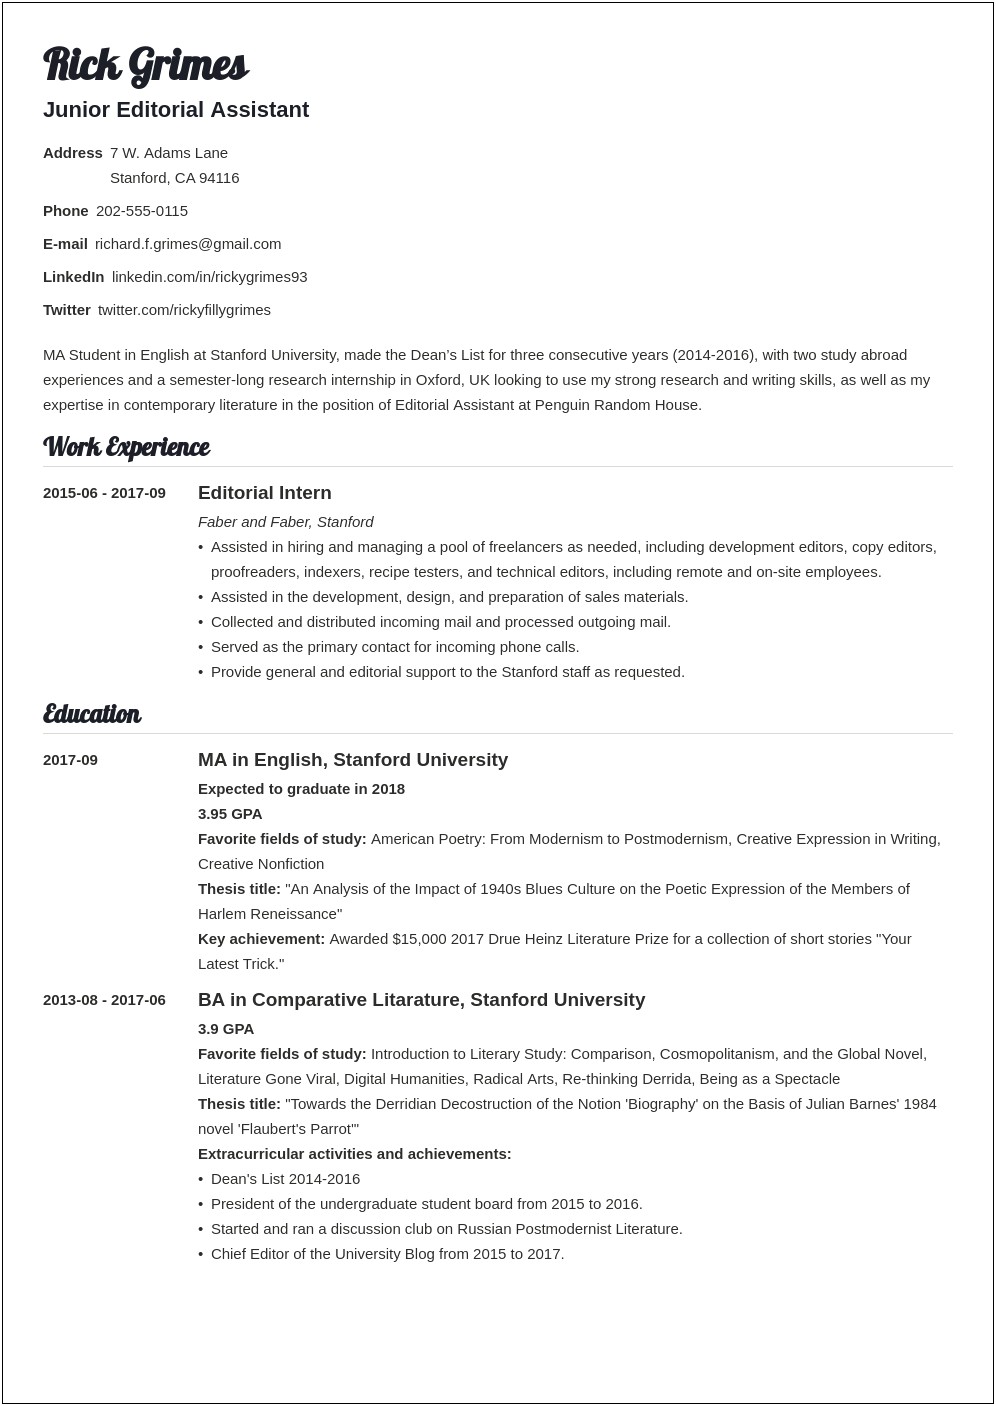 Resume Summary Examples For Office Worker